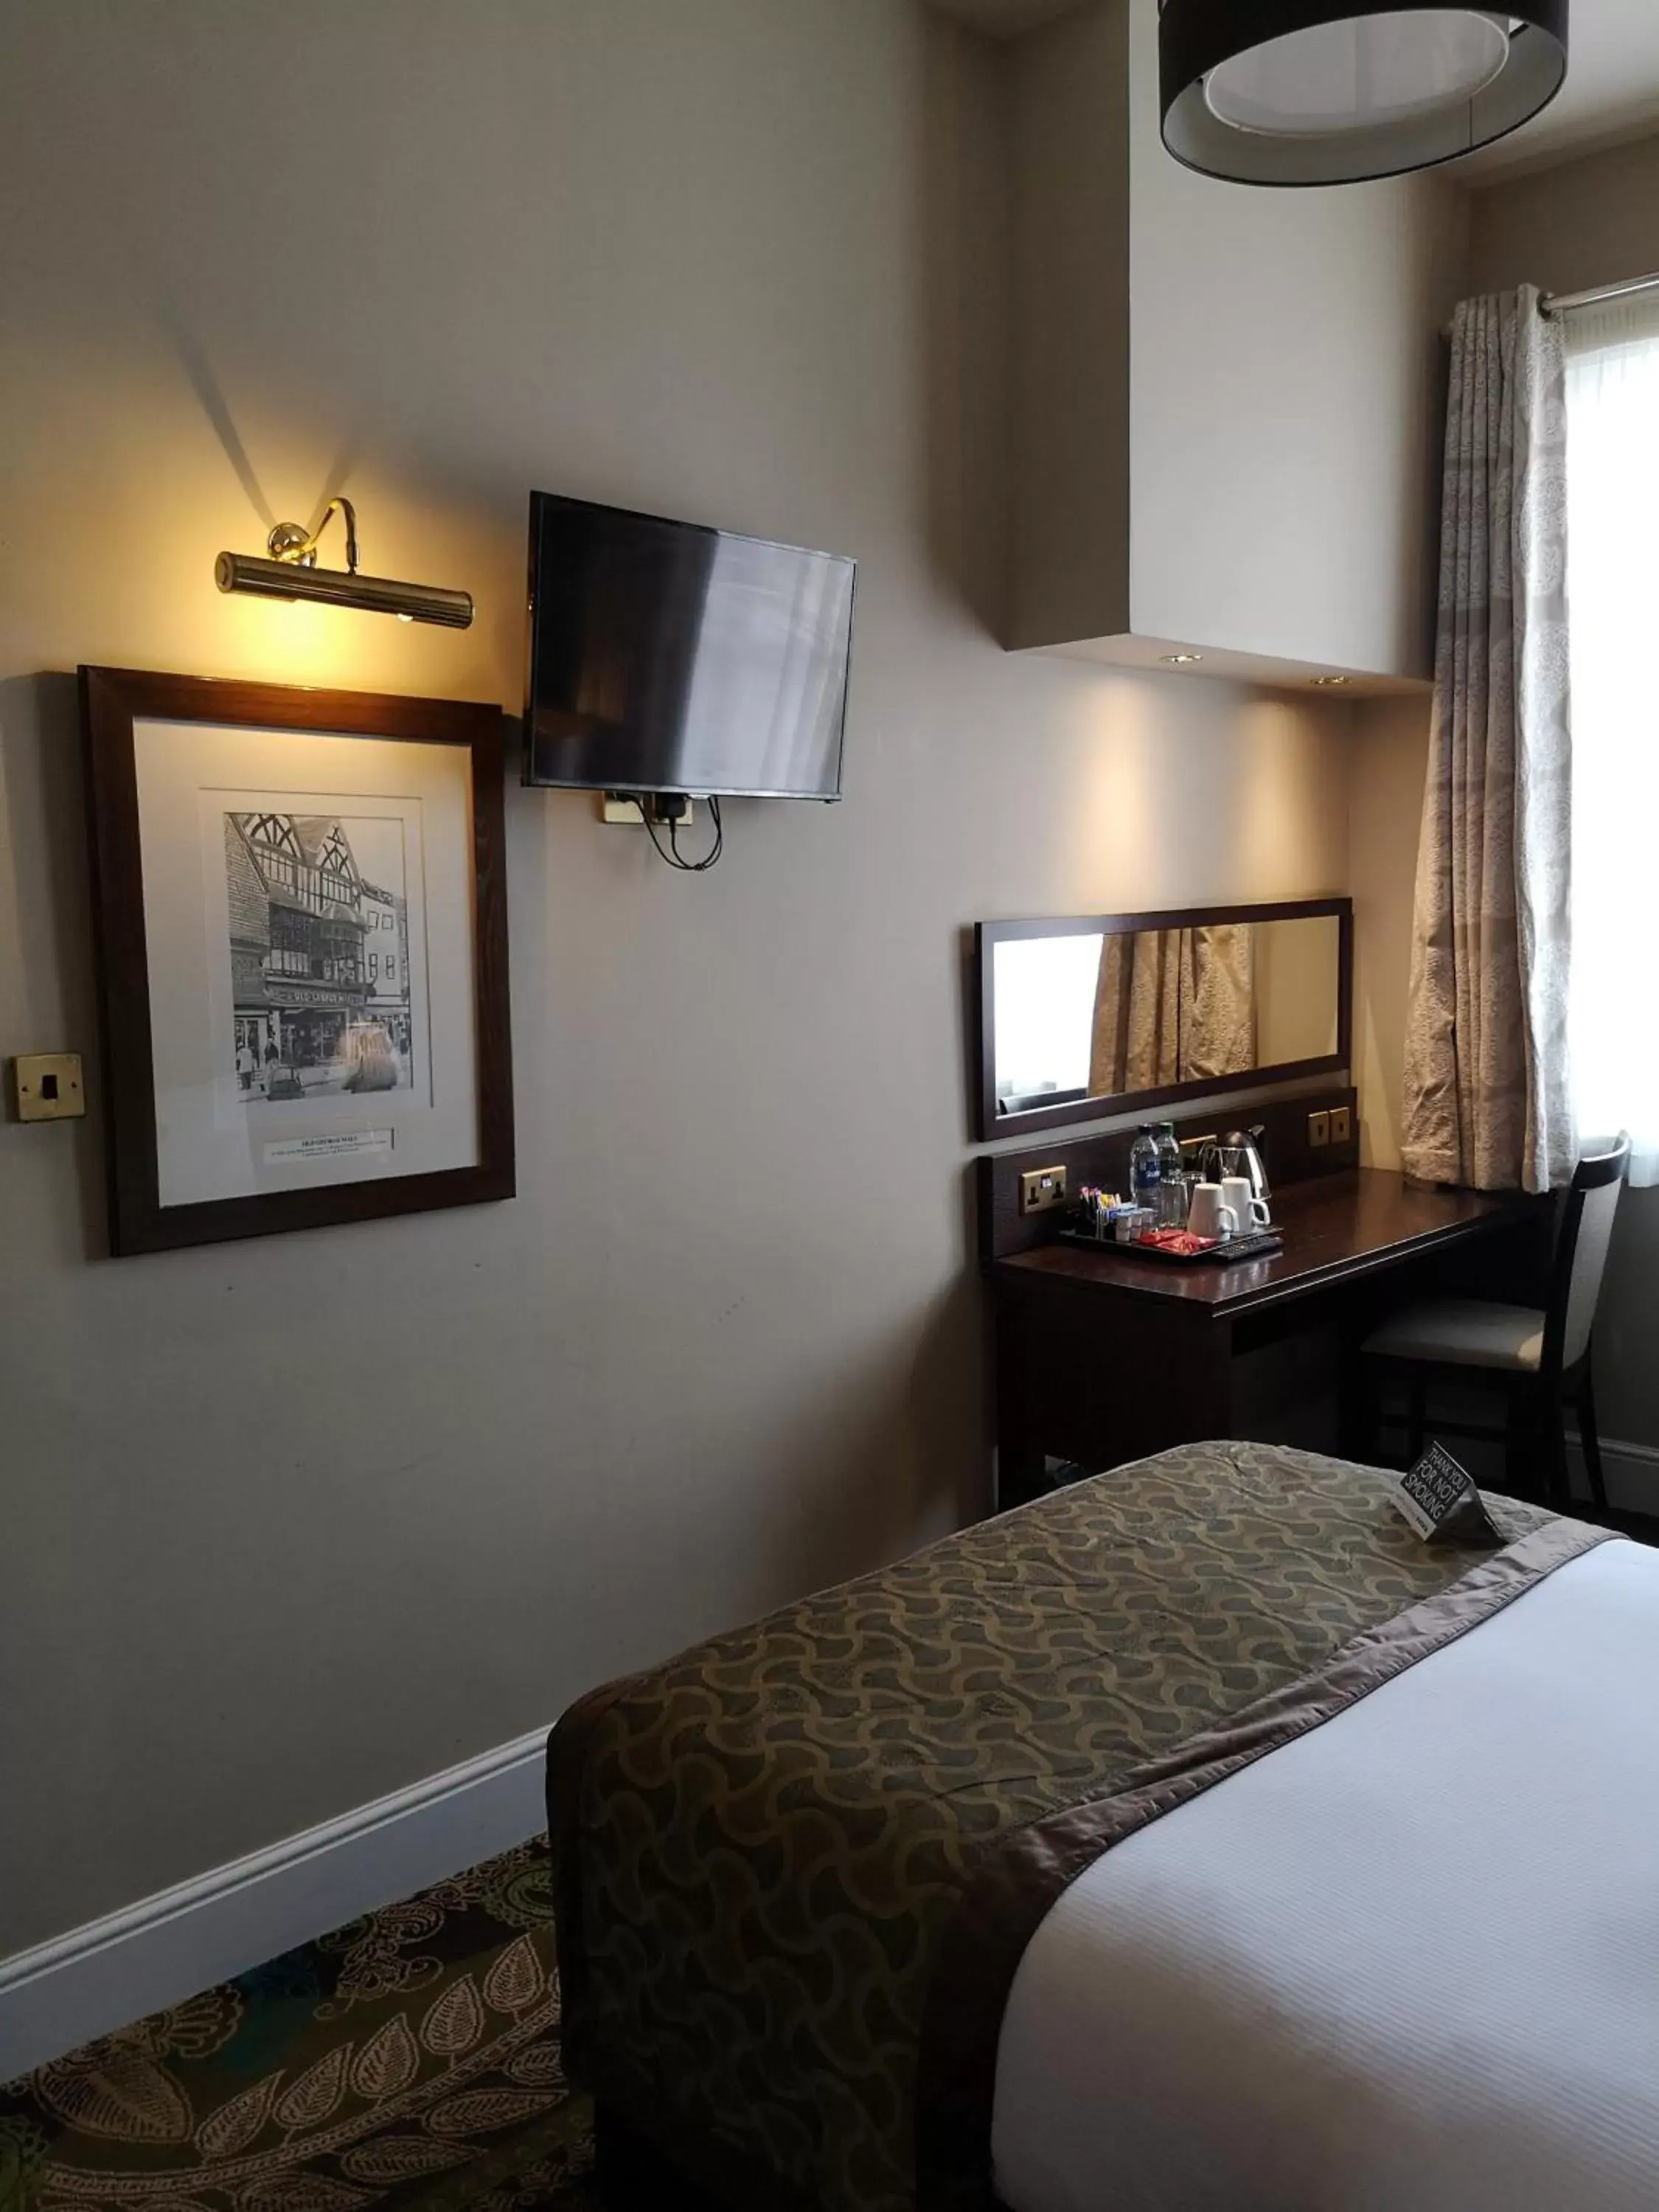 Bed, TV/Entertainment Center in The Kings Head Inn Wetherspoon